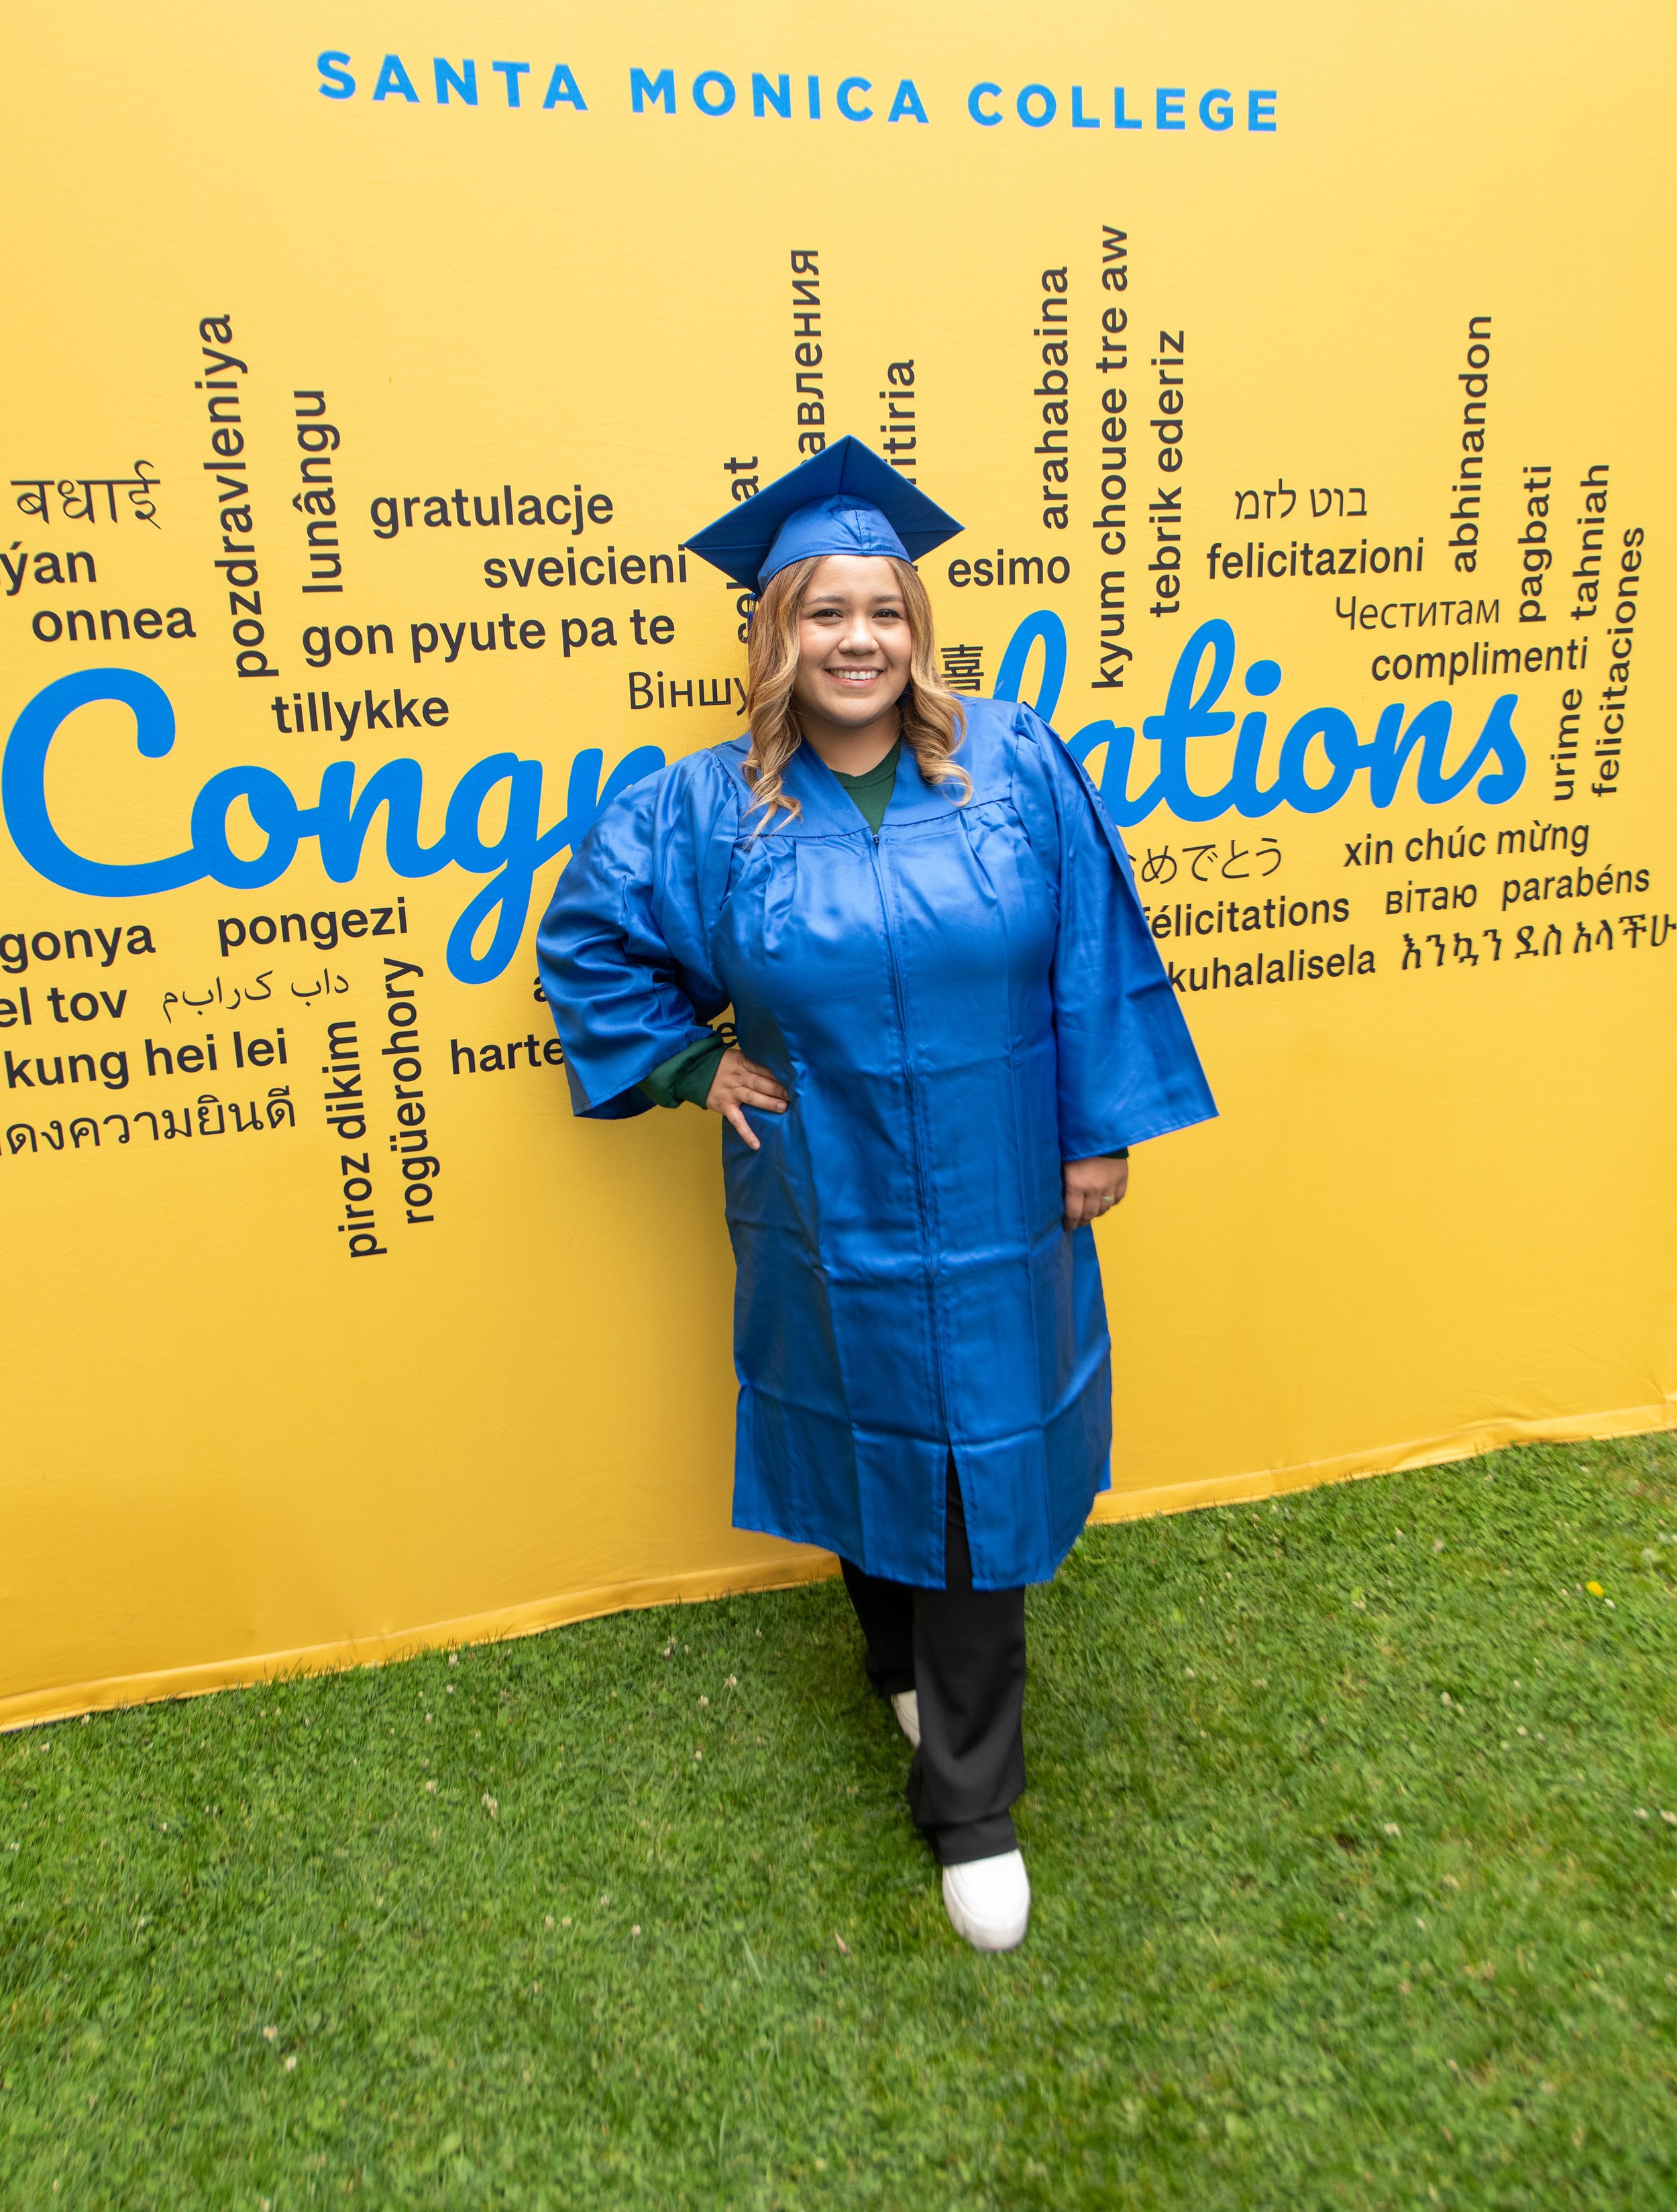  Student Jennifer Medrano poses in front of the background set up for graduates at Grad Fest Thursday, June 1 at Santa Monica College Main Quad ( Kevin Tidmore | TheCorsair ) 